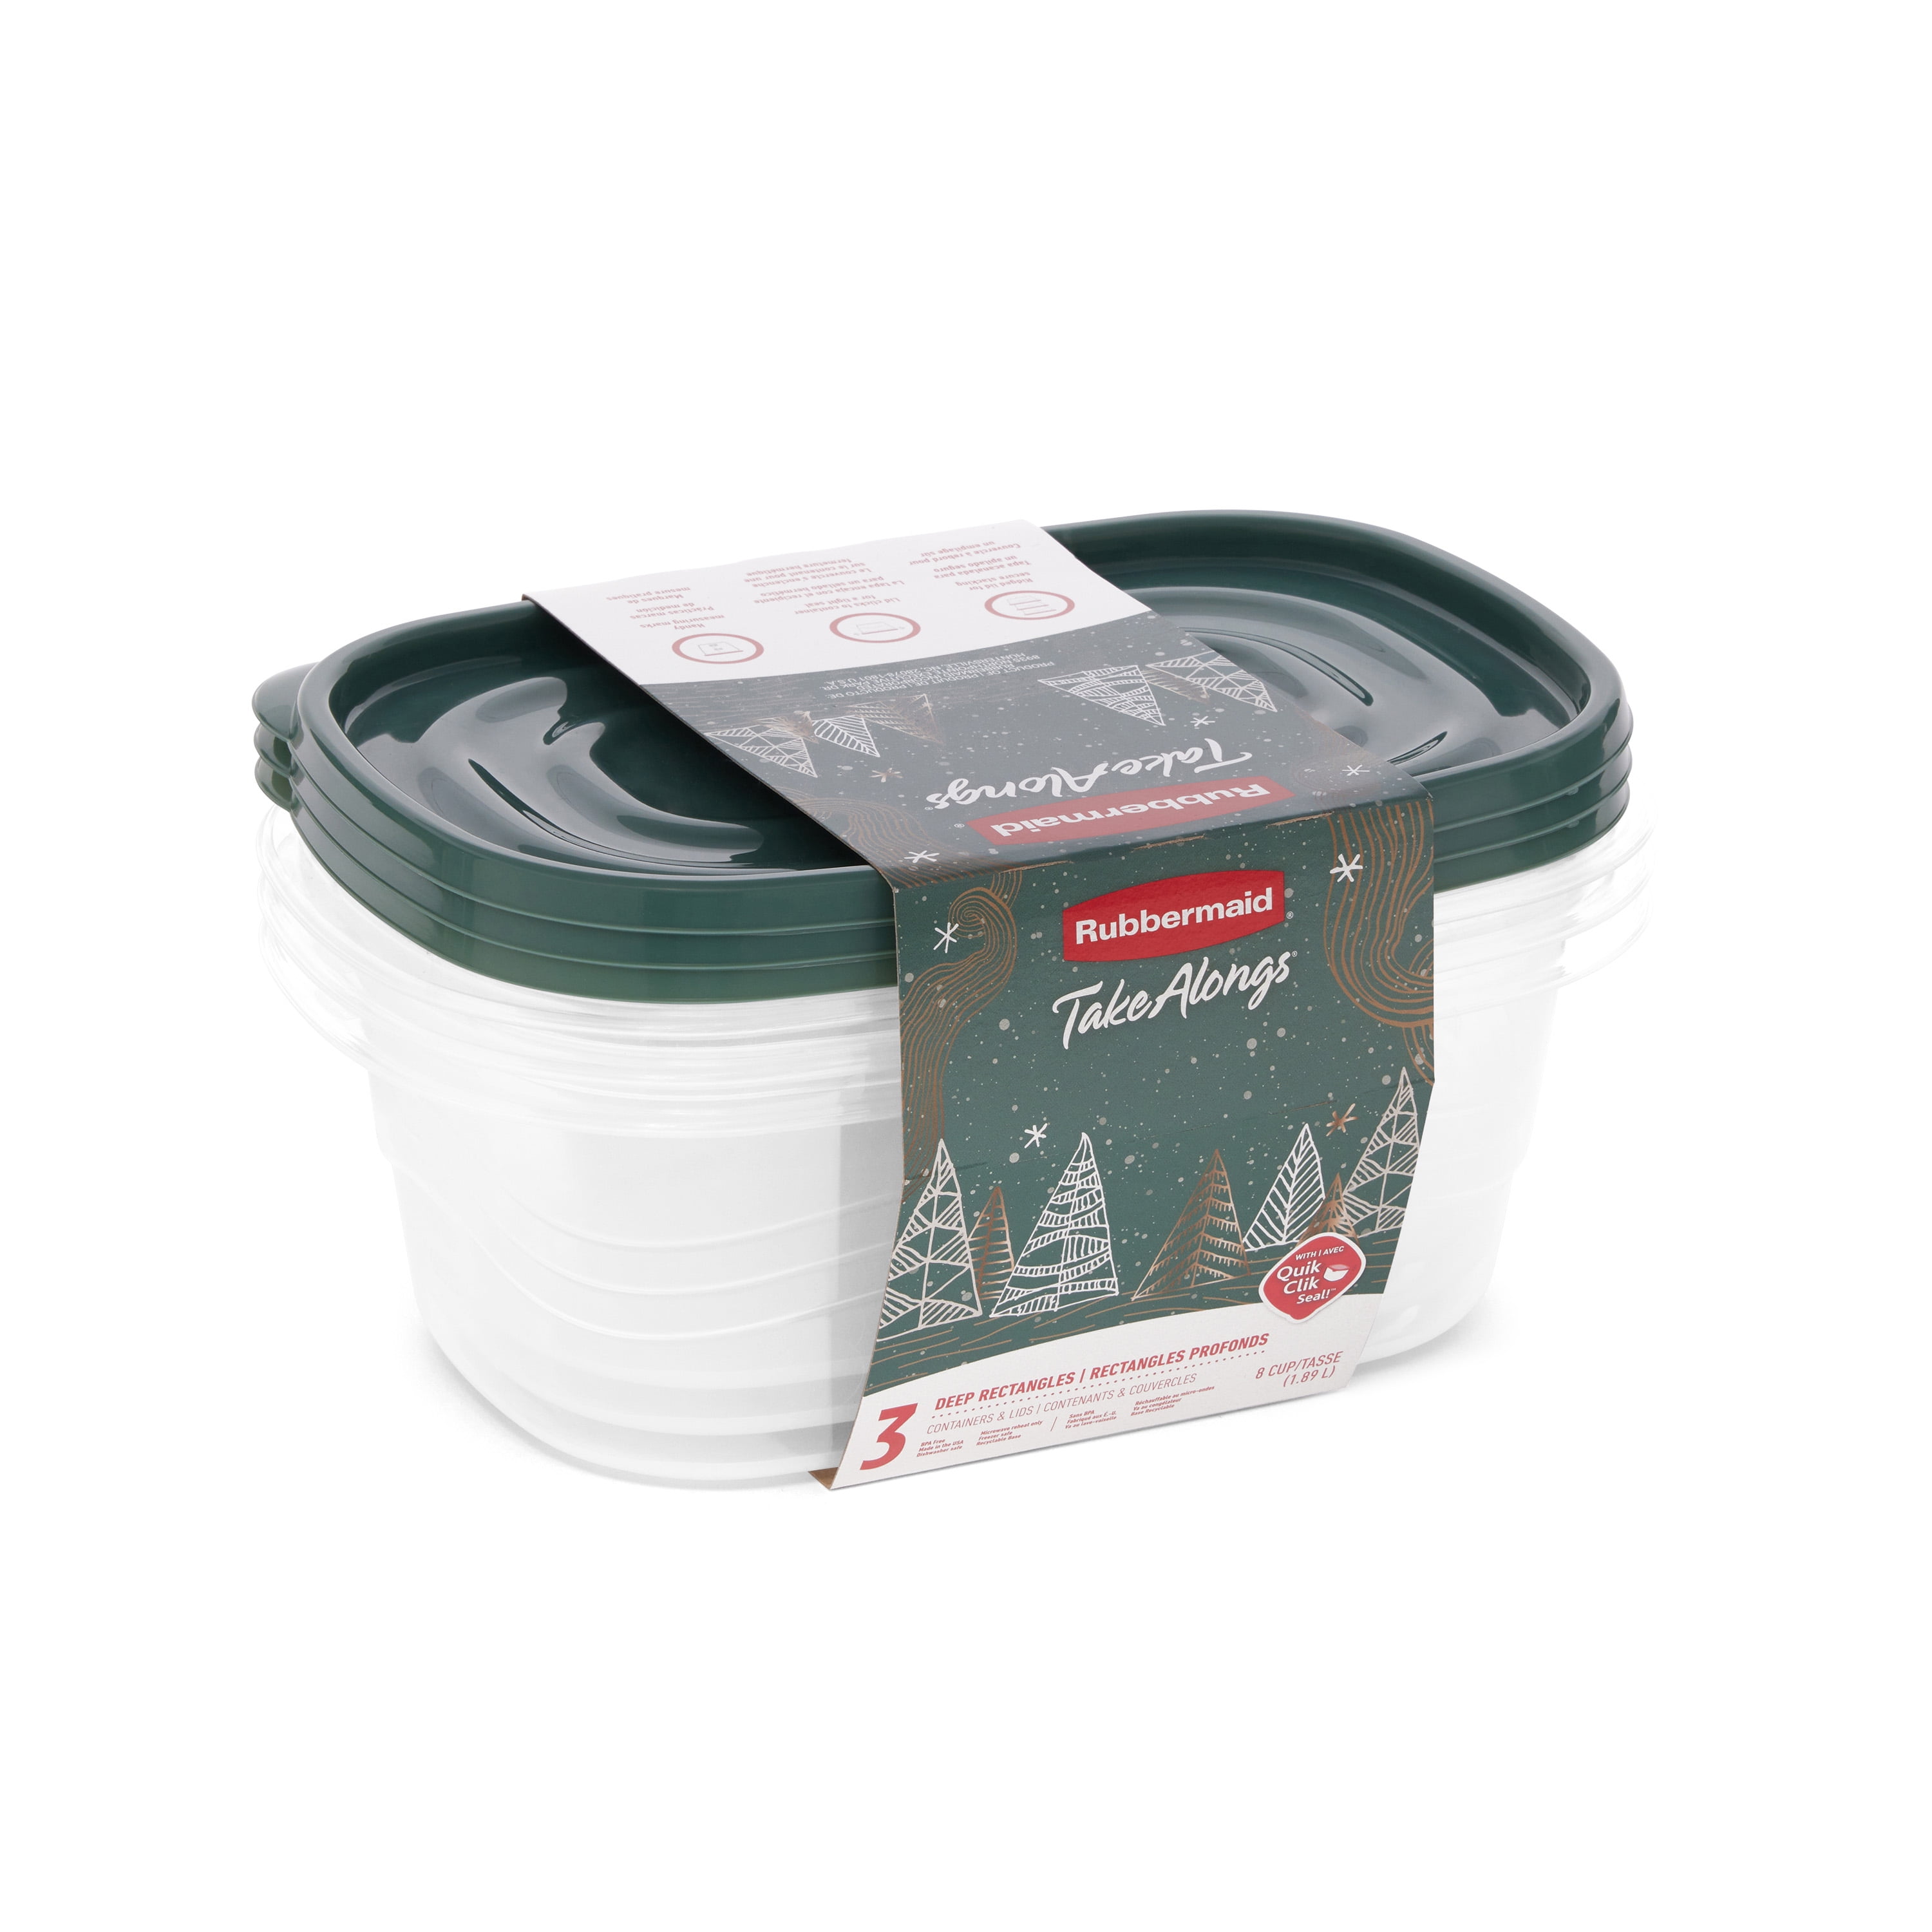 Rubbermaid Take Alongs Rectangular Containers with Lids, 6.4 x 3.1 x 9.8 - 3 pack